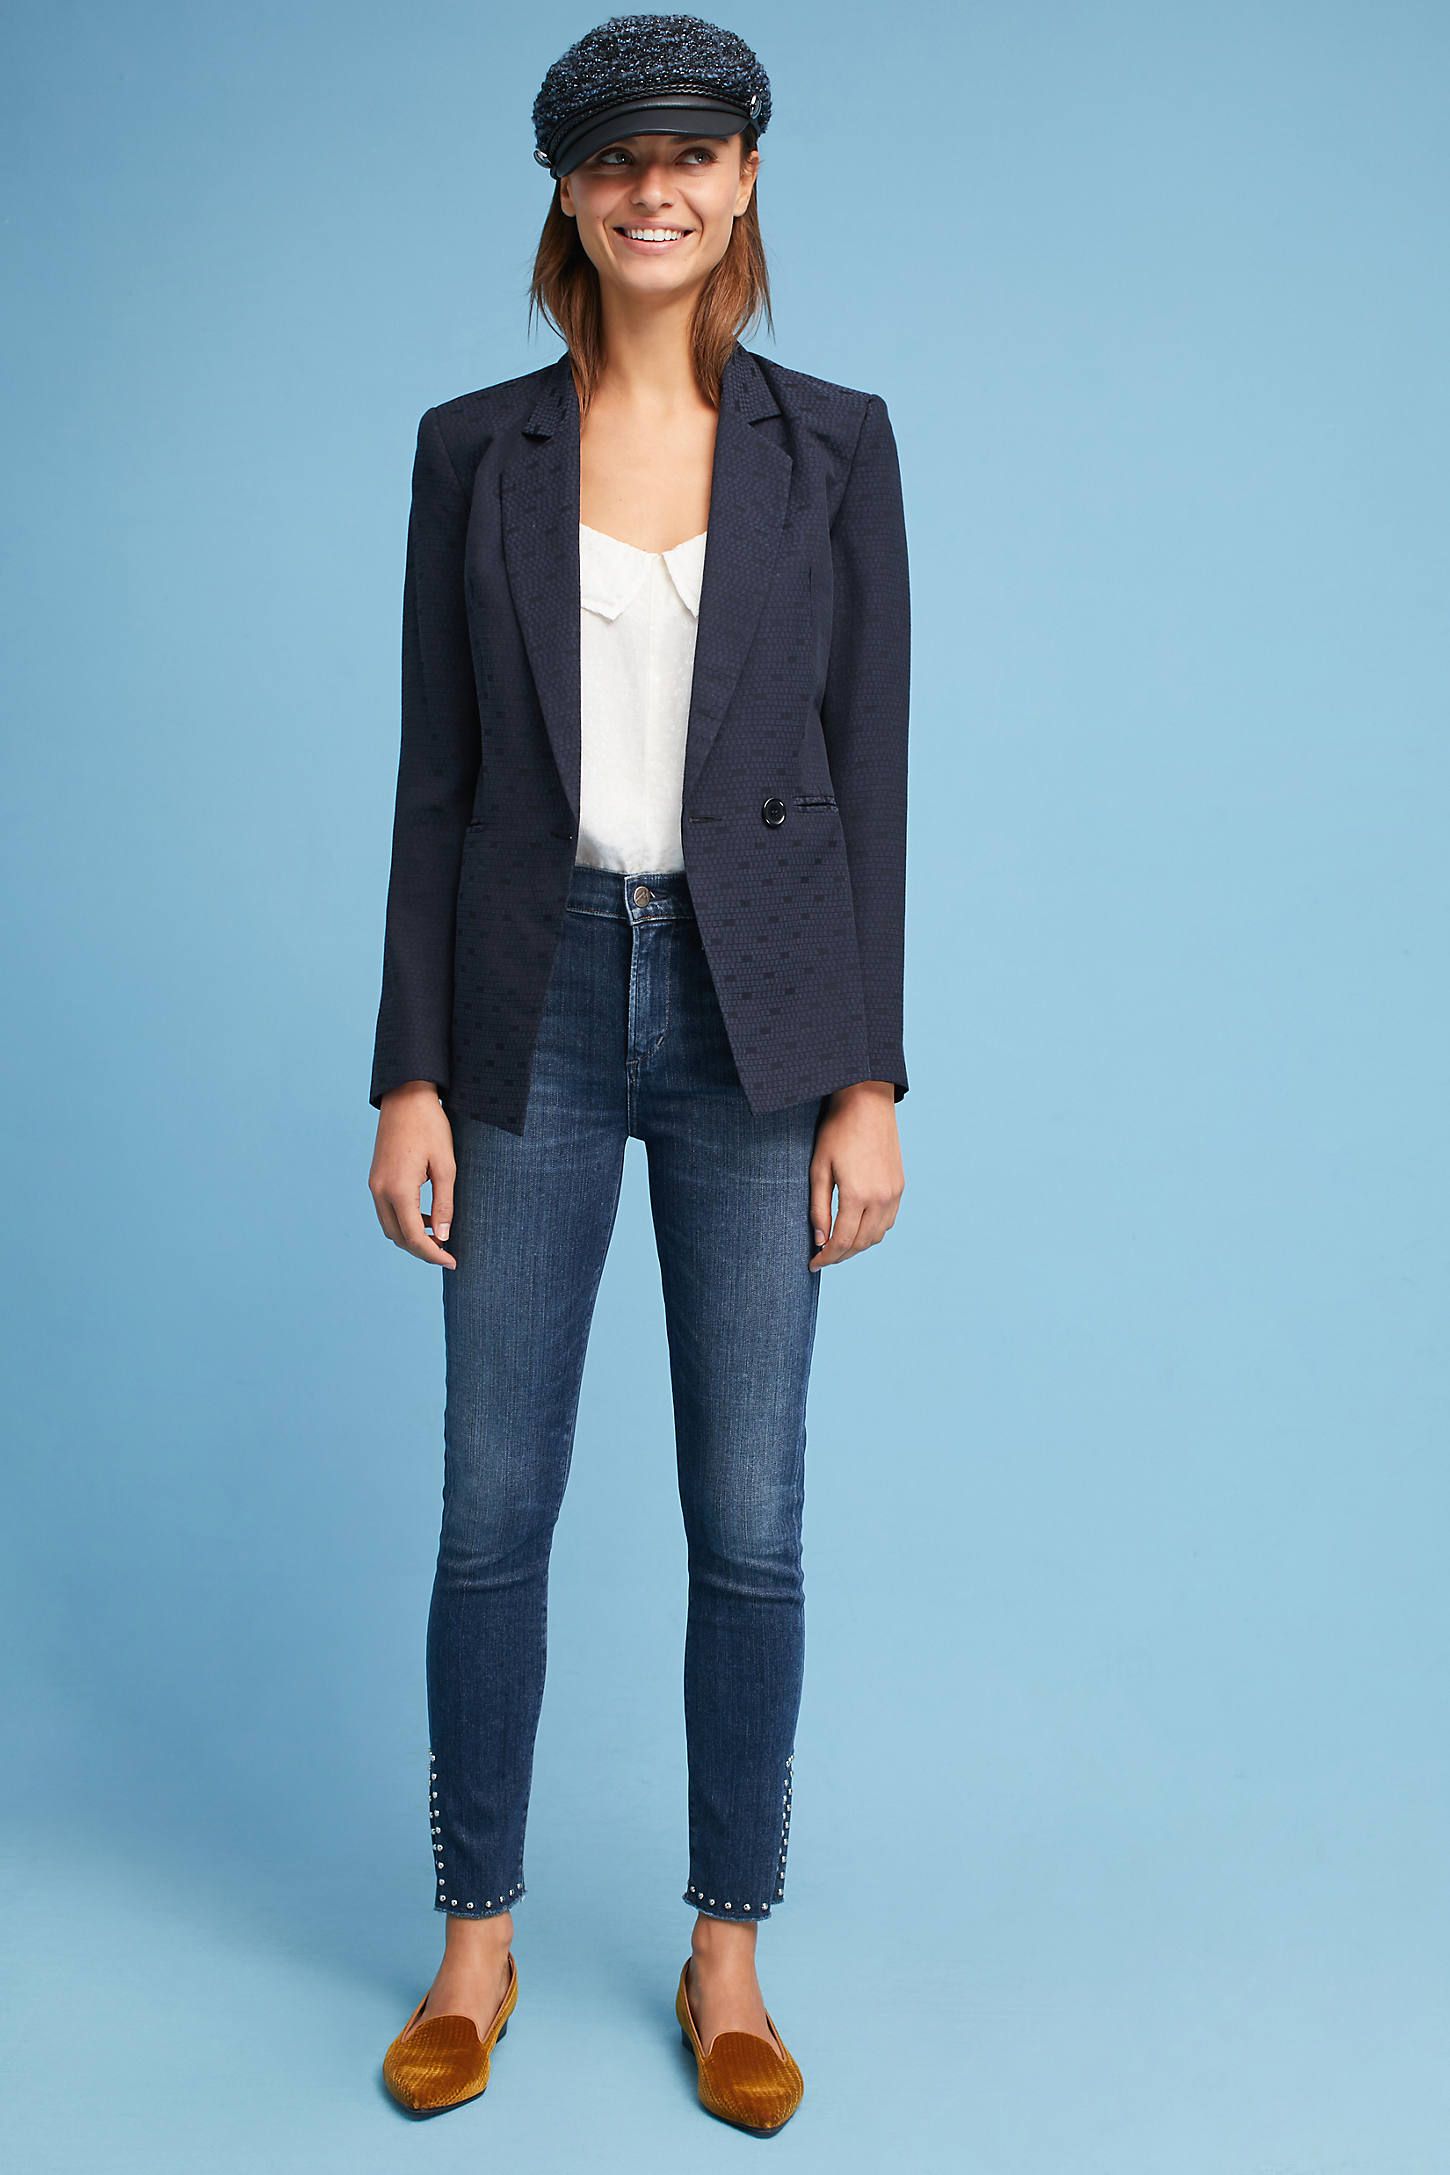 Citizens of Humanity Rocket Crop High-Rise Skinny Jeans | Anthropologie (US)